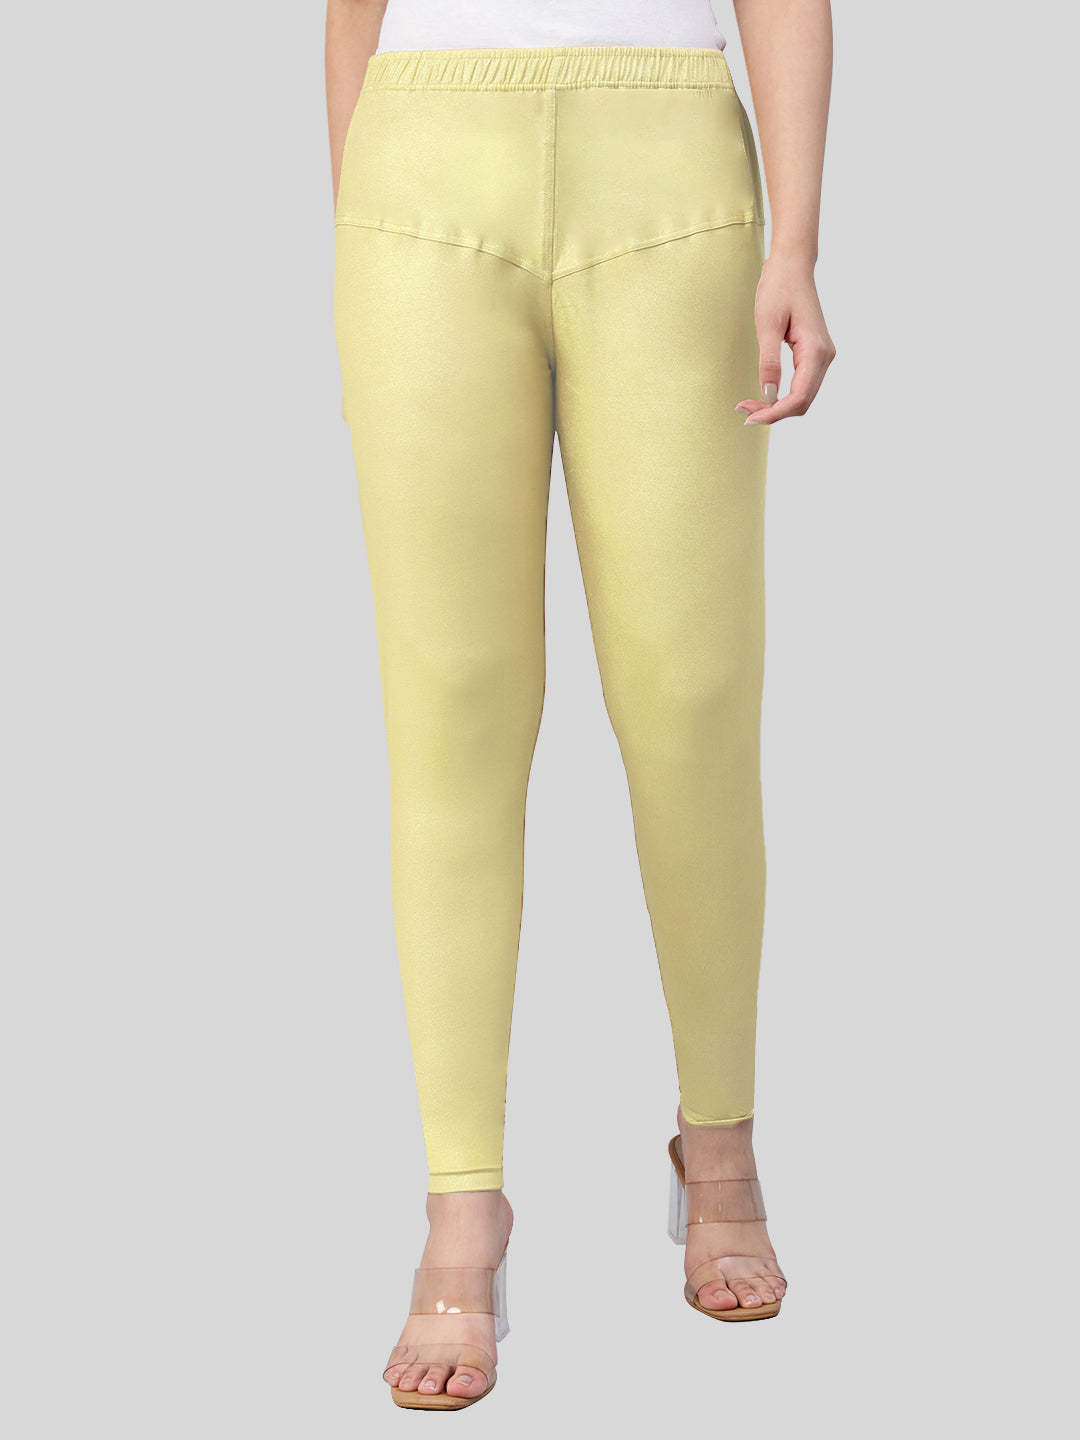 Buy White Fitted Pants Online - W for Woman